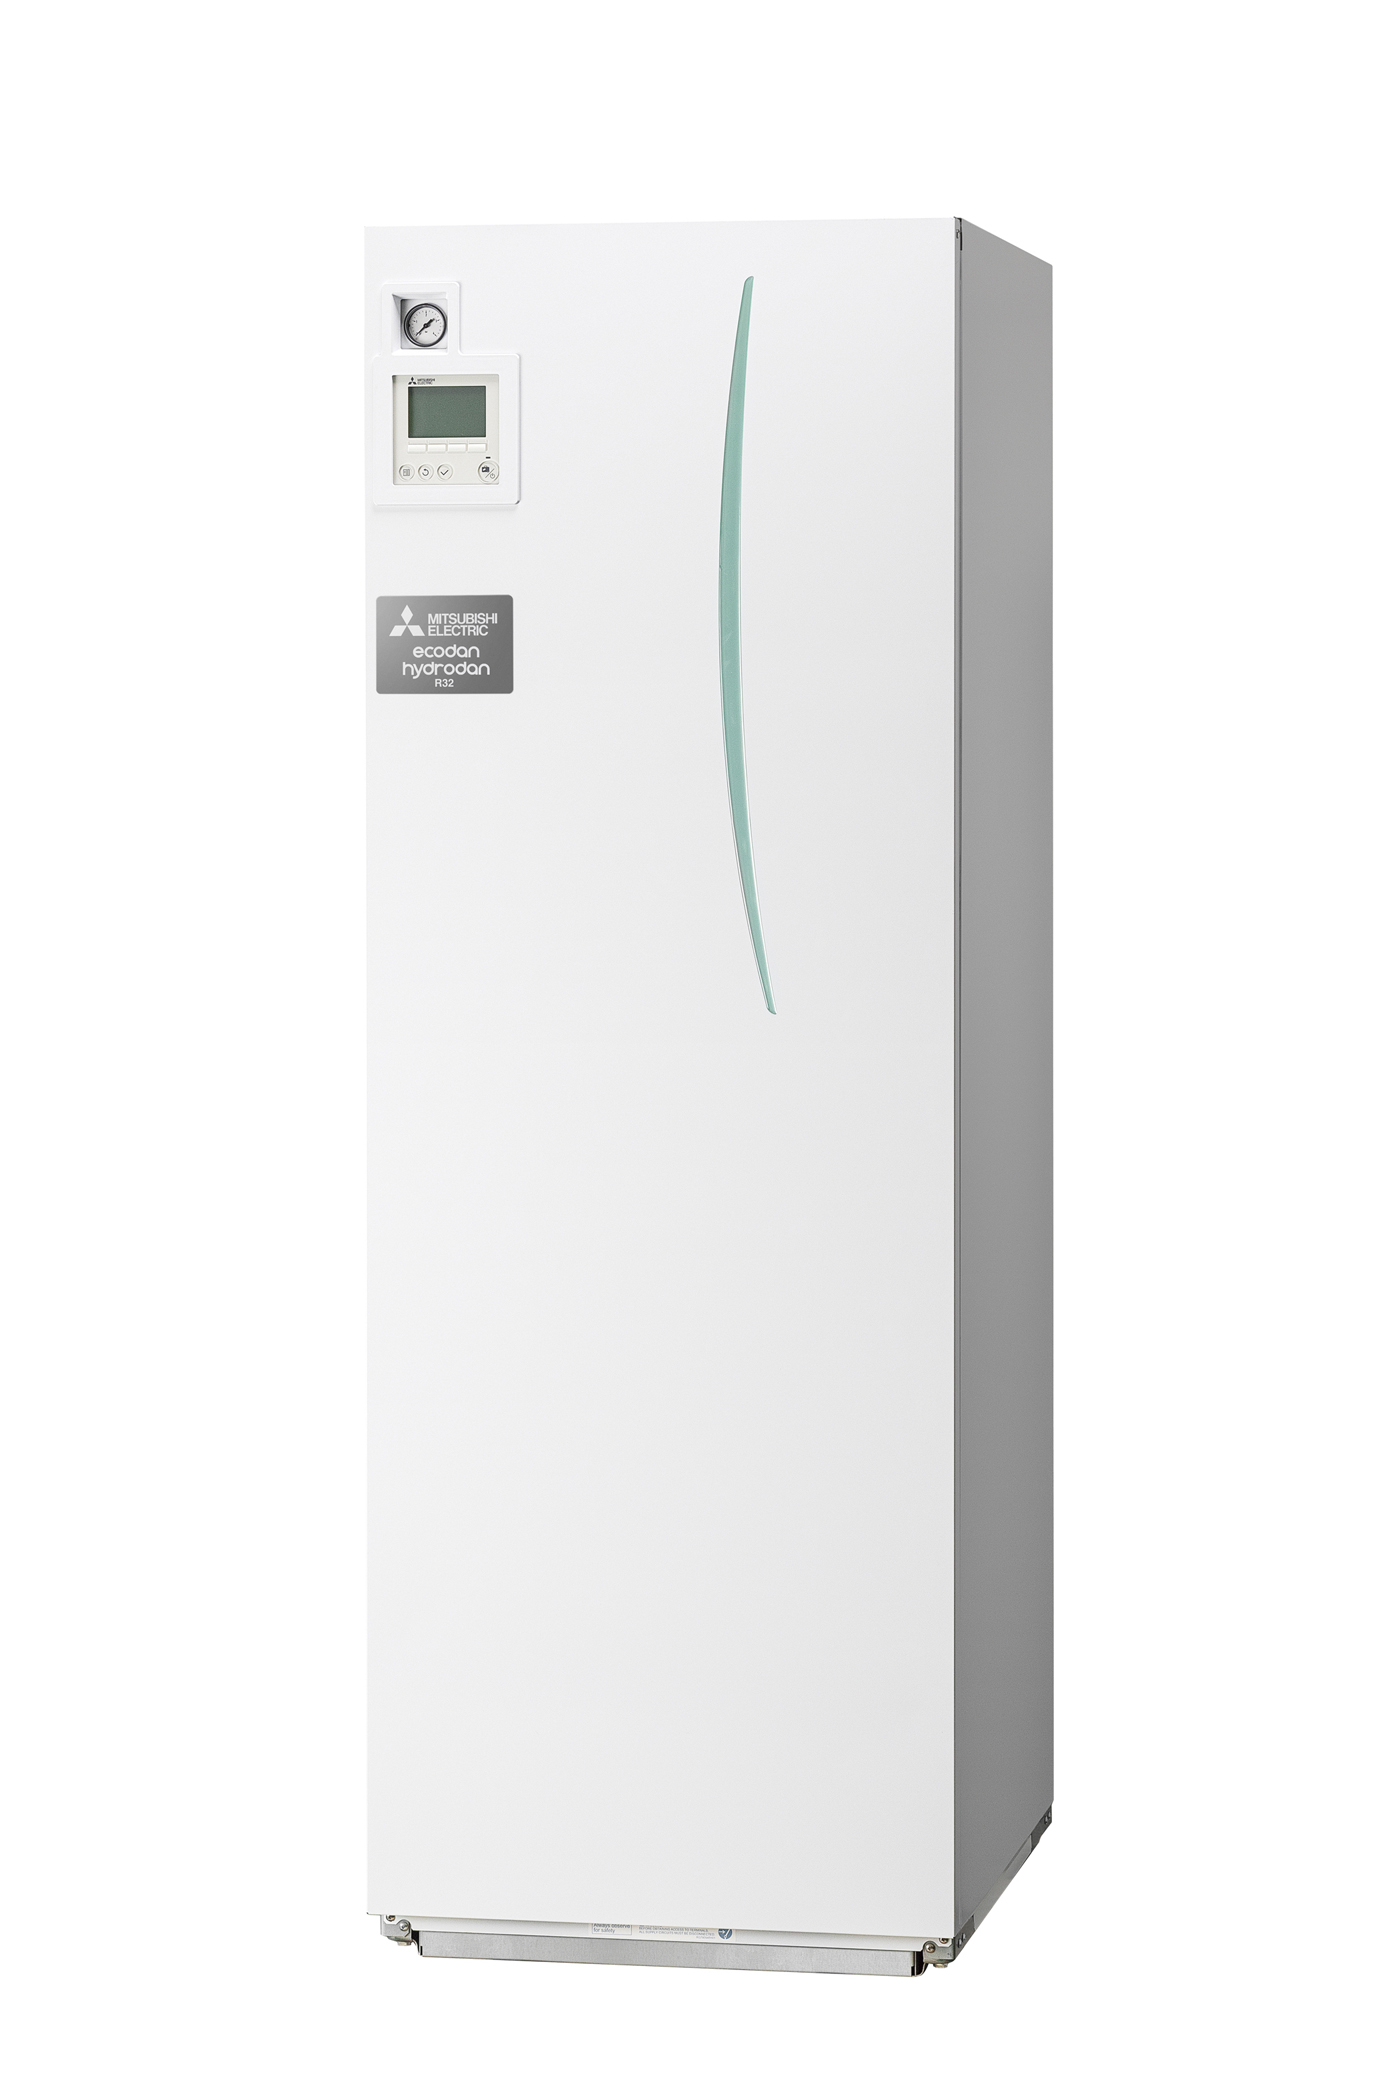 Mitsubishi Electric launches low carbon heat pump for multi-residential sector